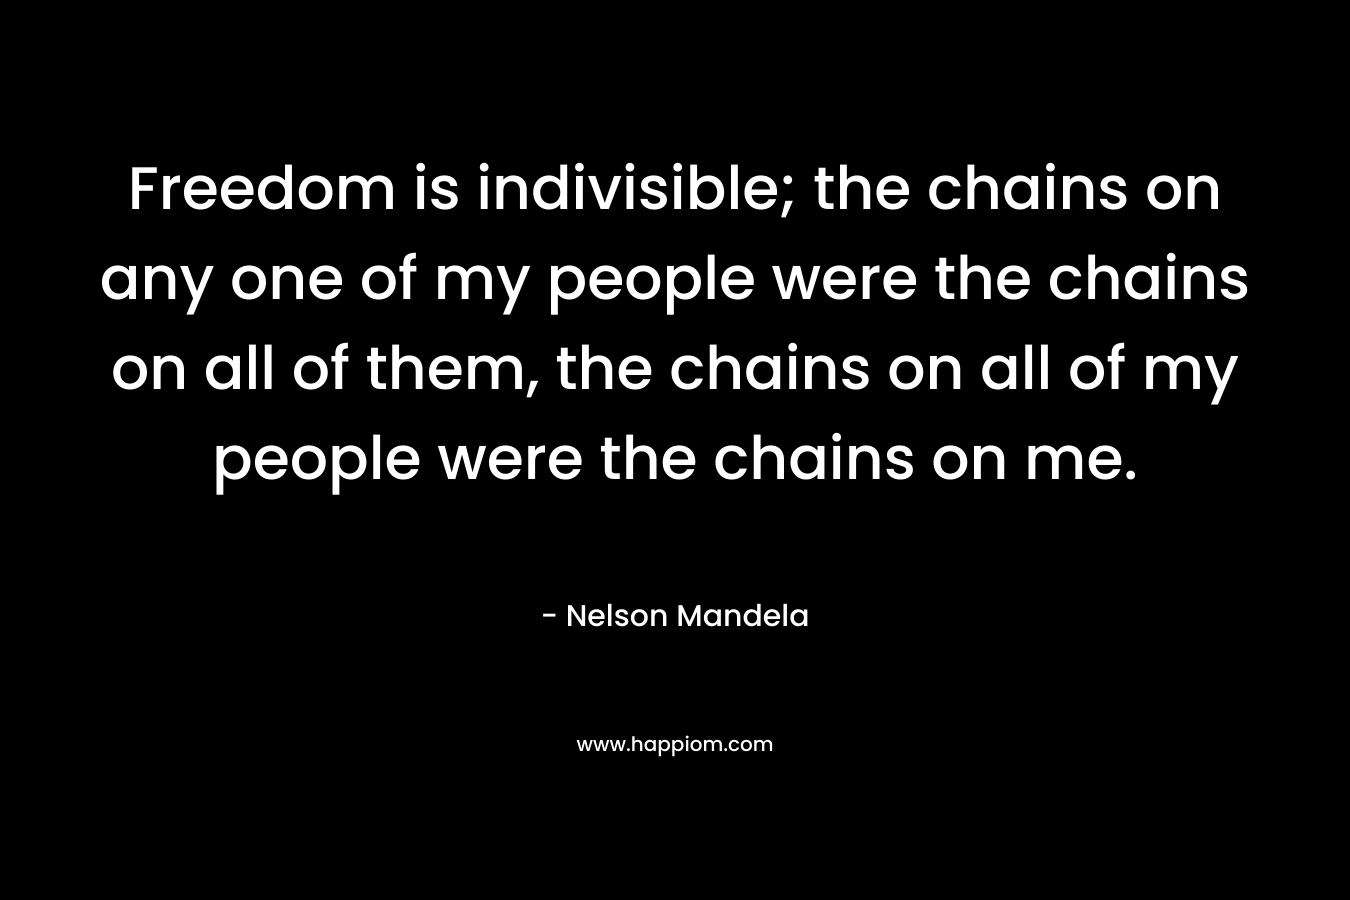 Freedom is indivisible; the chains on any one of my people were the chains on all of them, the chains on all of my people were the chains on me. – Nelson Mandela